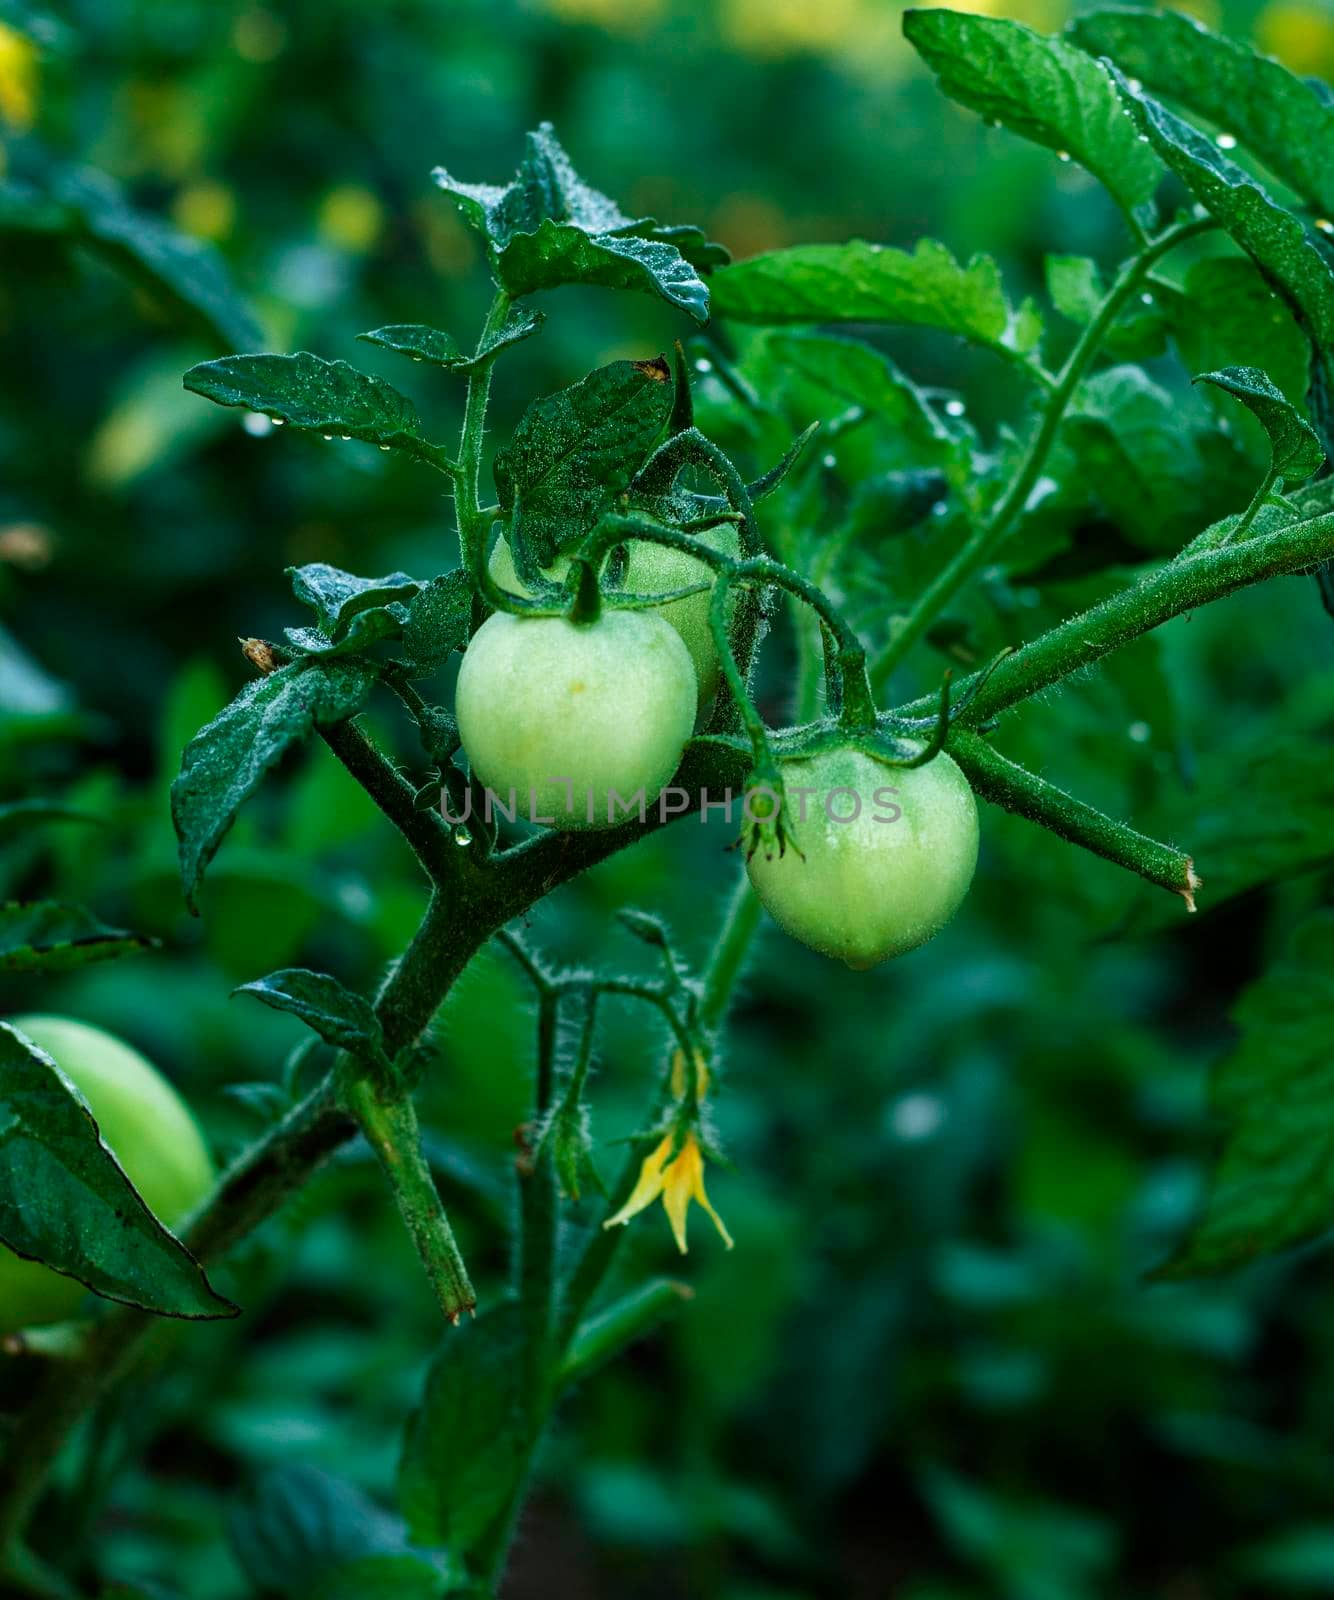 Cherry tomatoes ripening in an orchard during summer. organic farms. Green natural tomatoes growing on branch in a greenhouse. tomato plant with still green, unripe tomatoes, garden season begins.